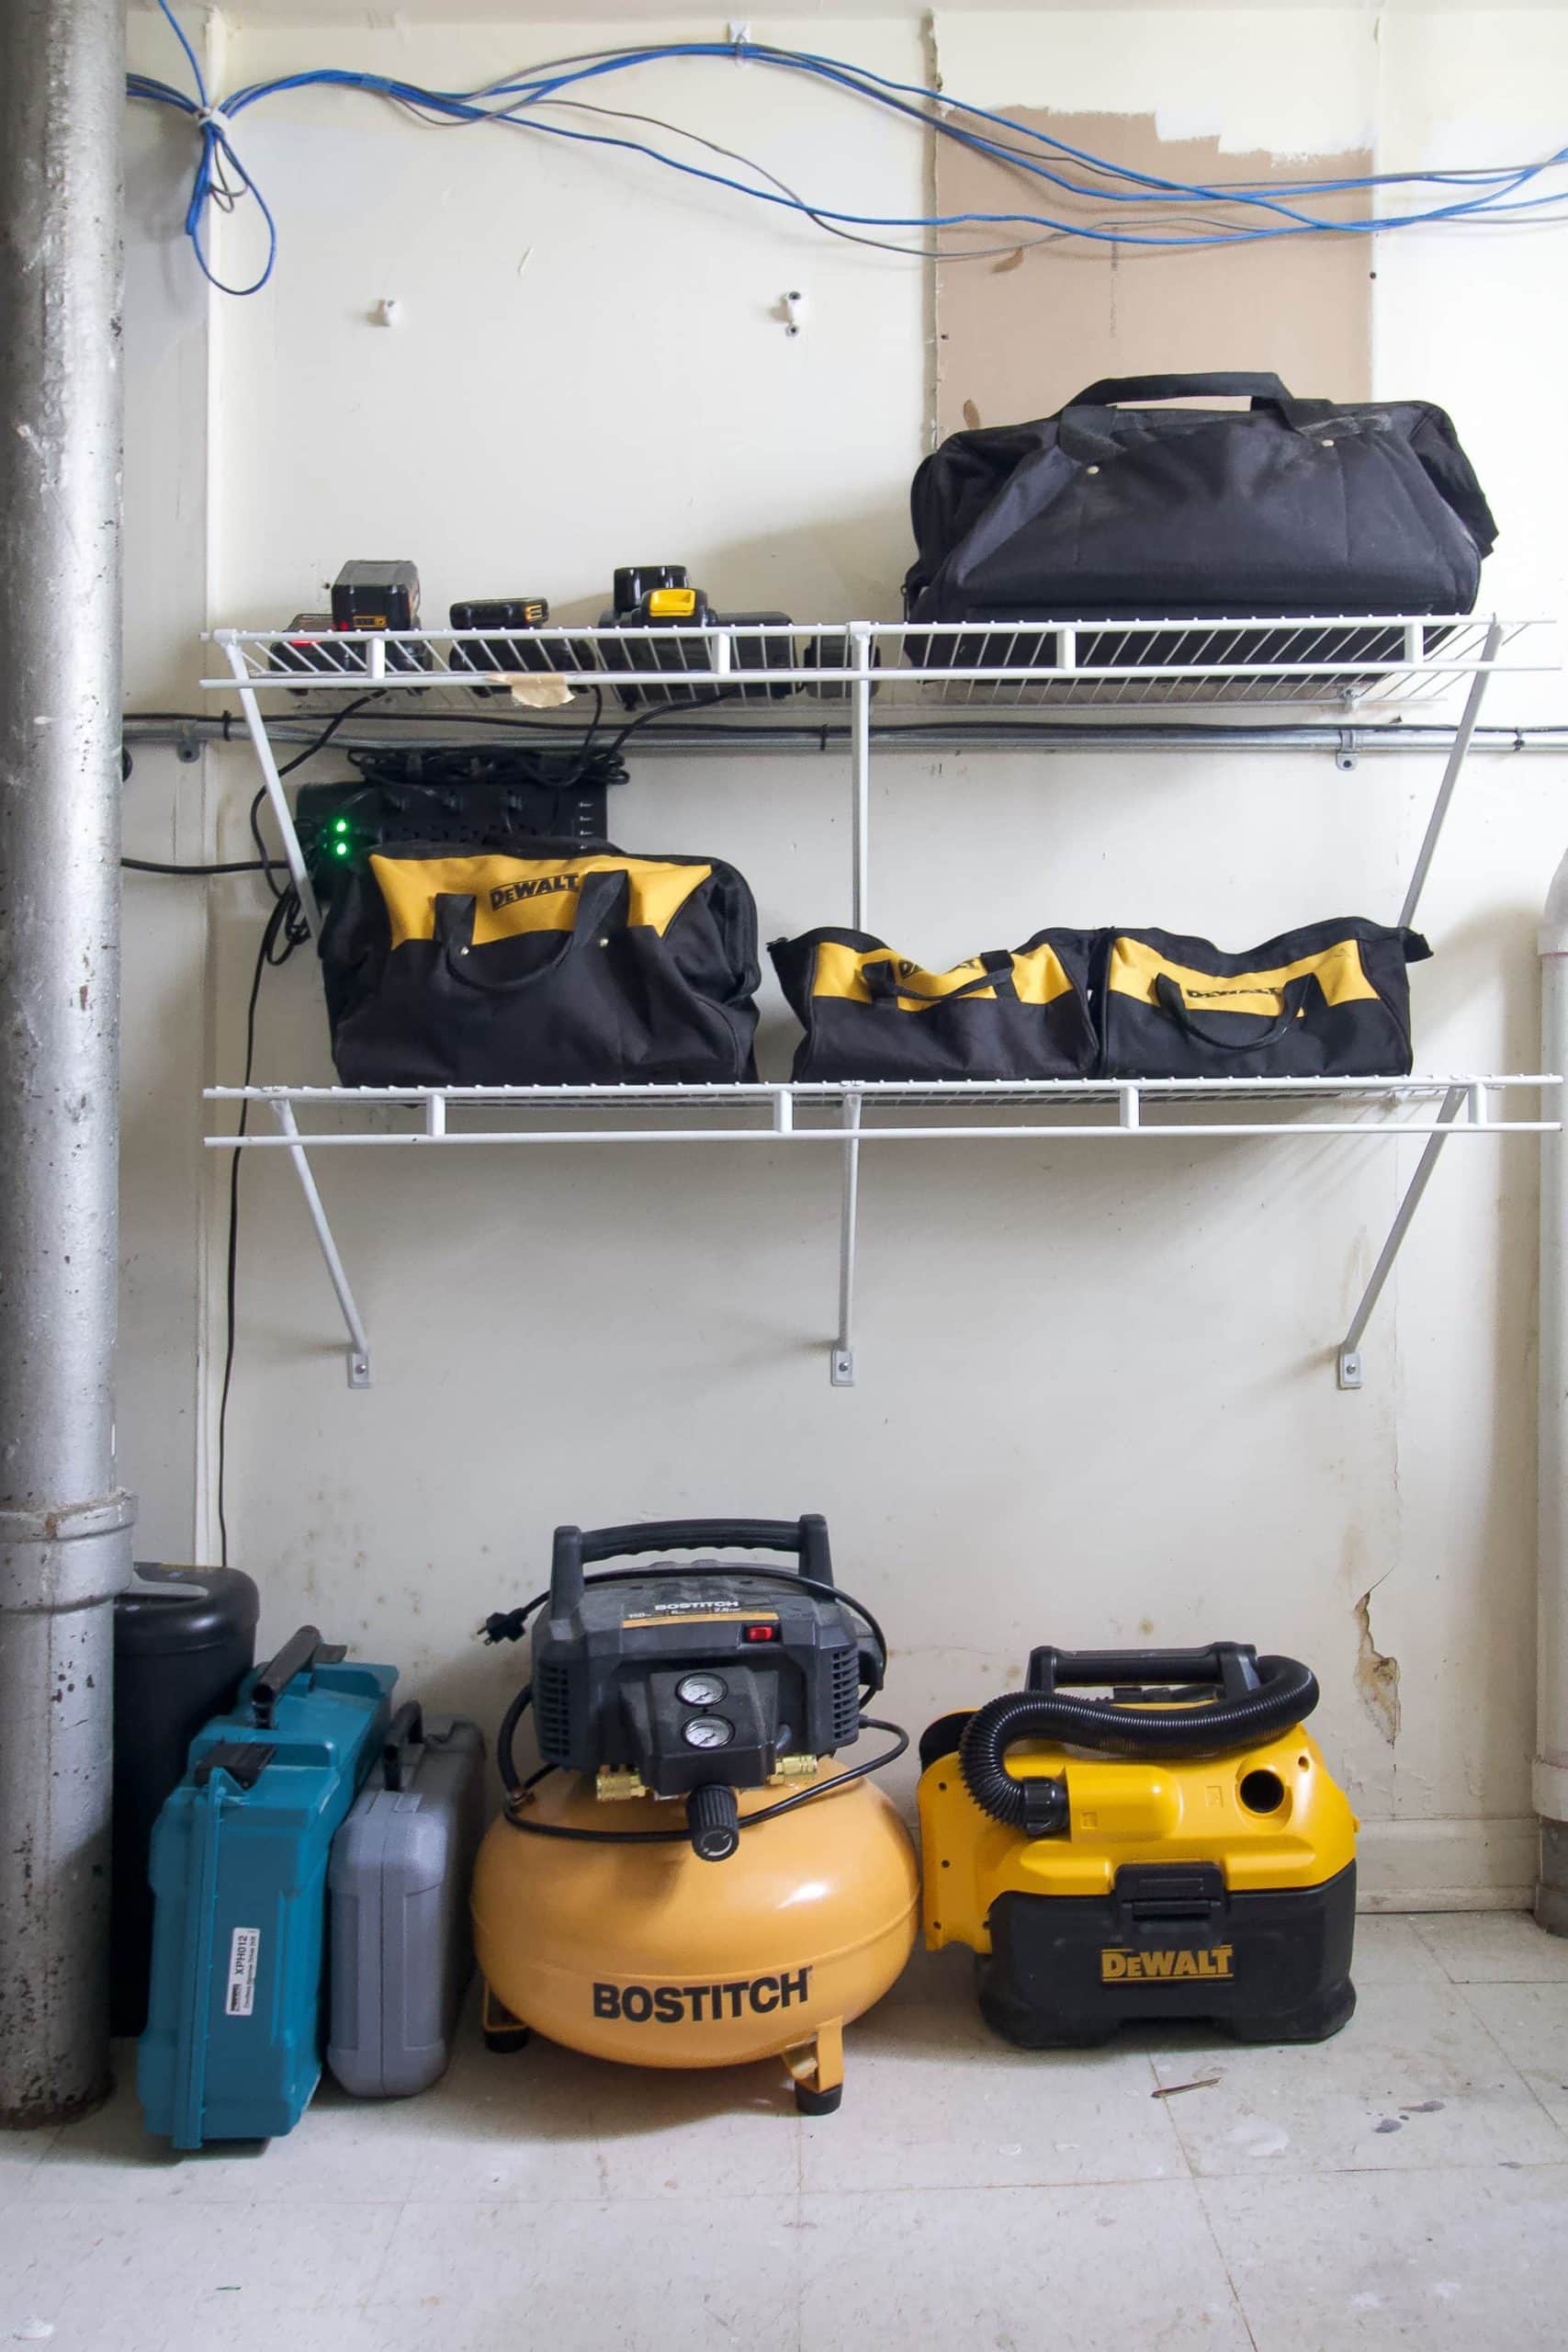 Our organized tool storage in the basement